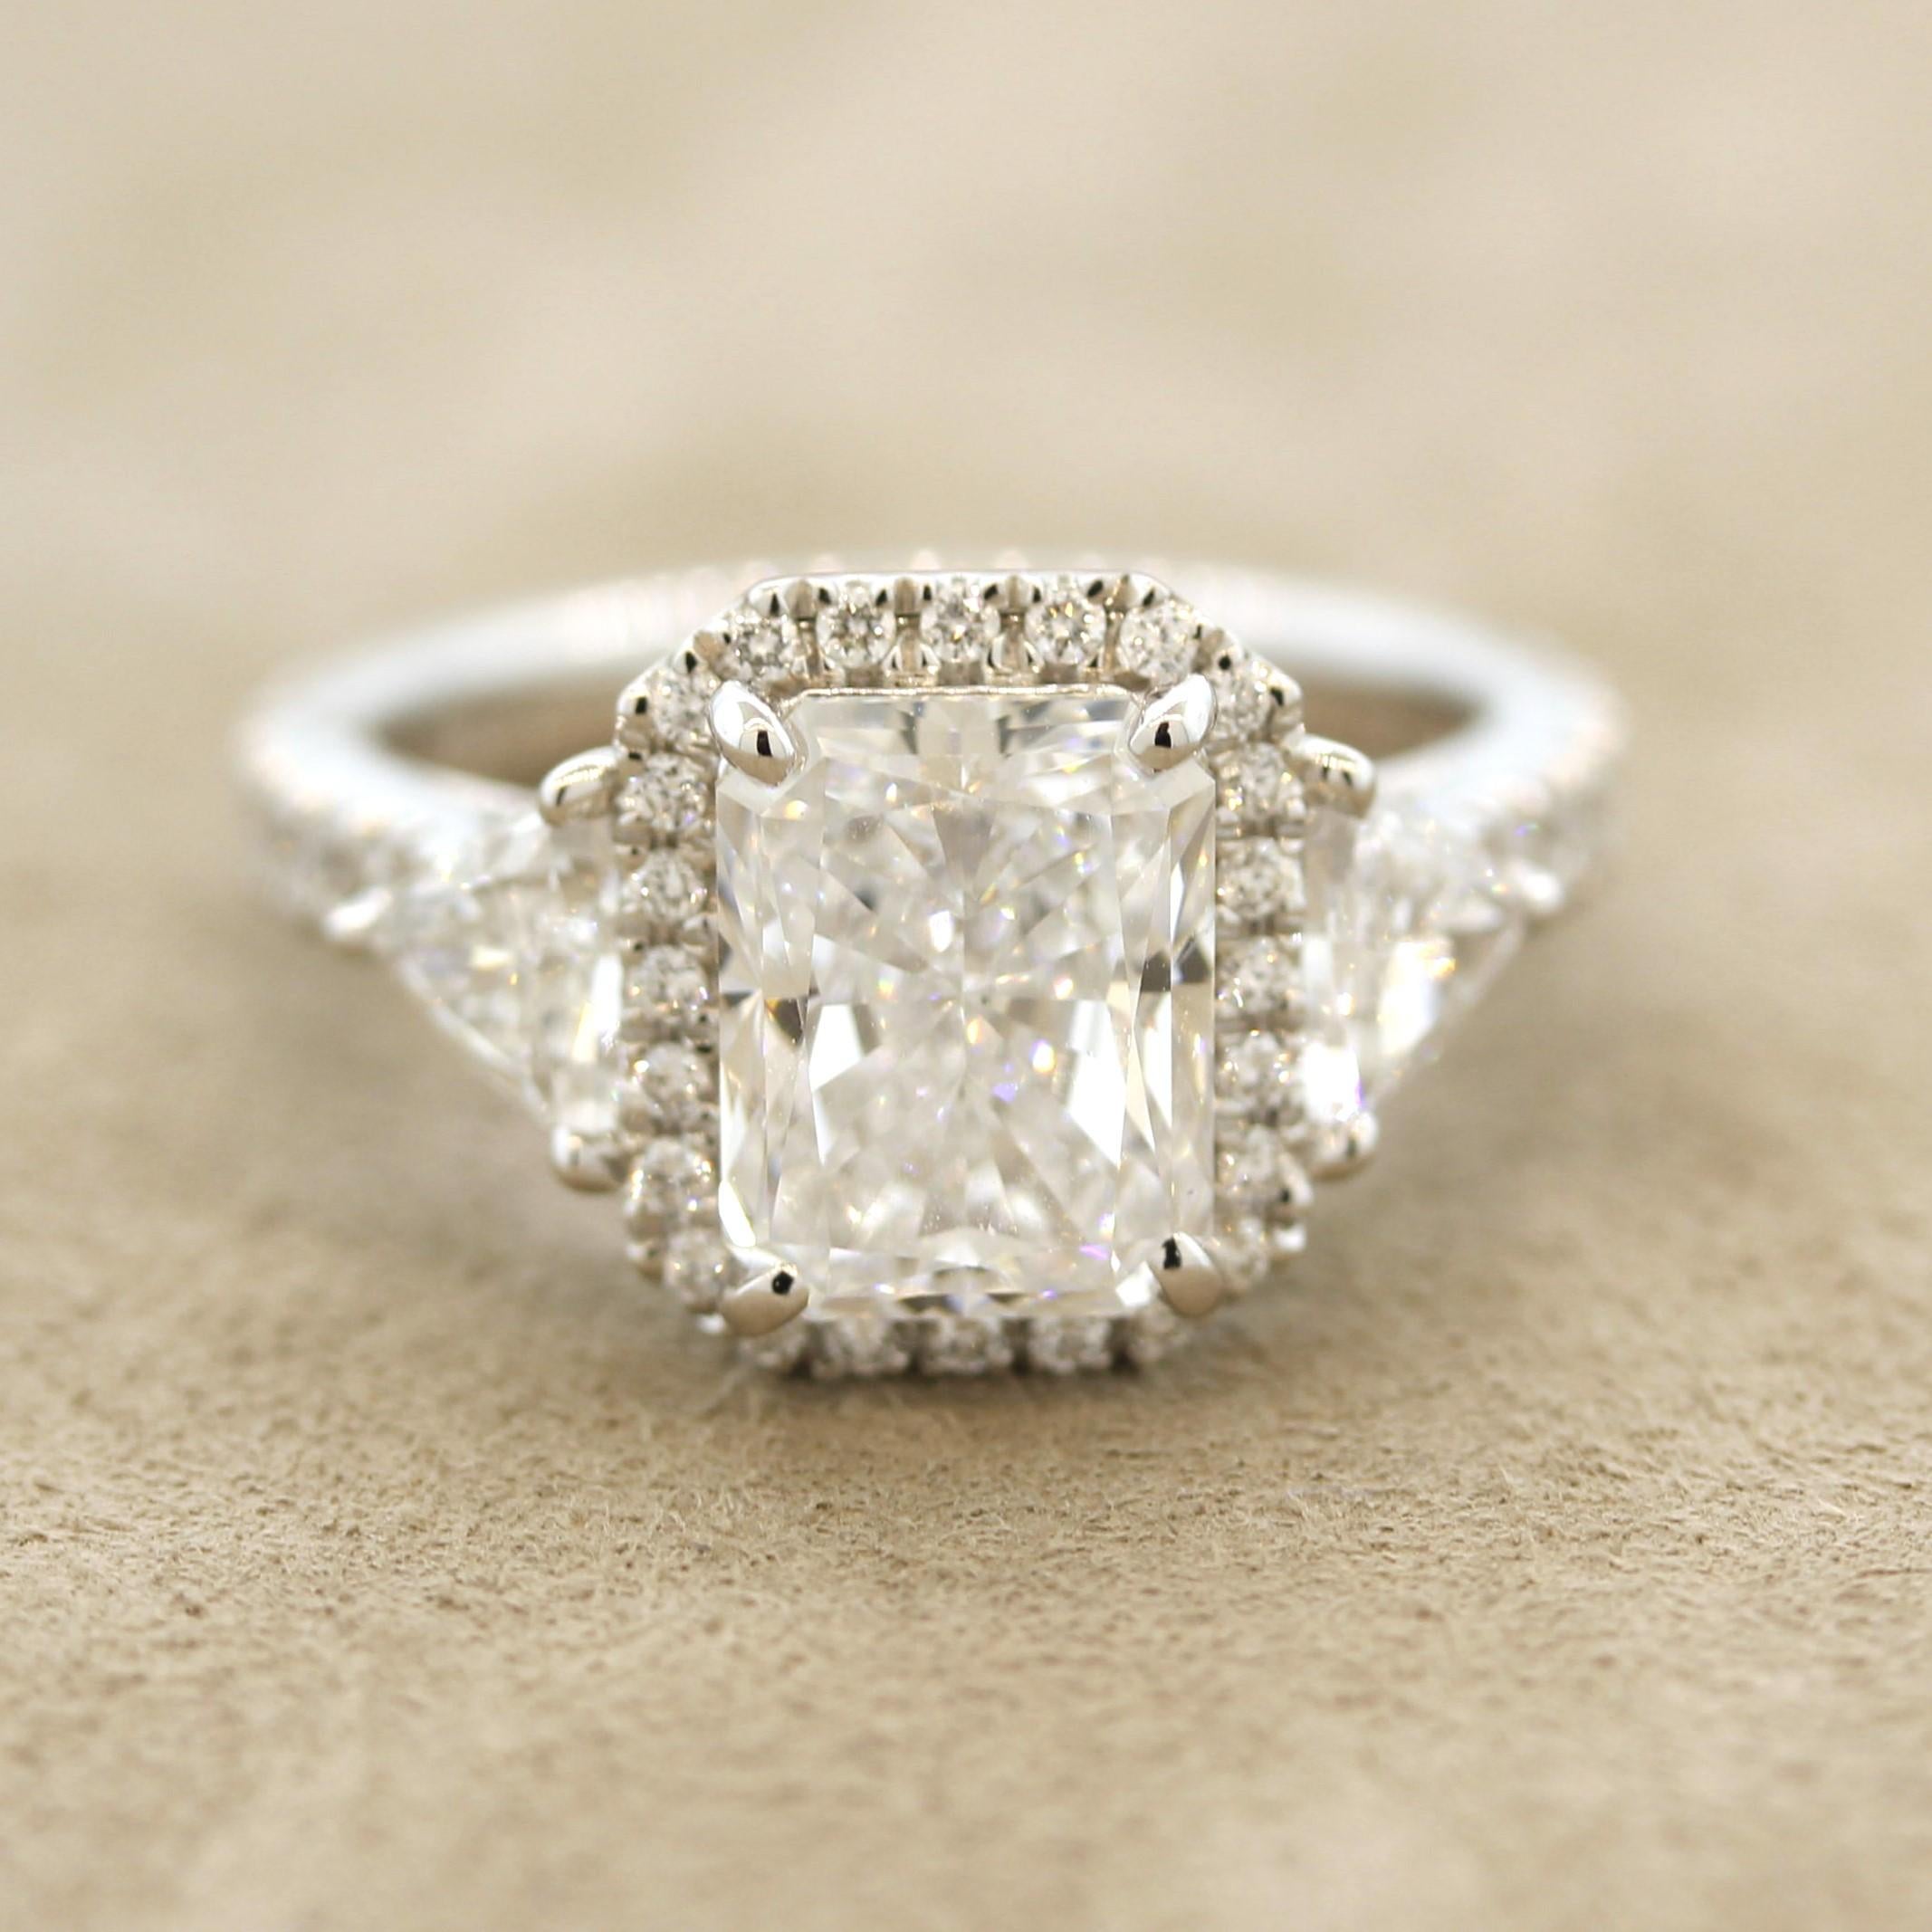 As good as it gets! A 3.04 carat radiant-cut diamond mains this lovely platinum made ring. It has a D color grade and IF (internally flawless) clarity grade making this diamond extremely pure, clean, and white! It is complemented by two